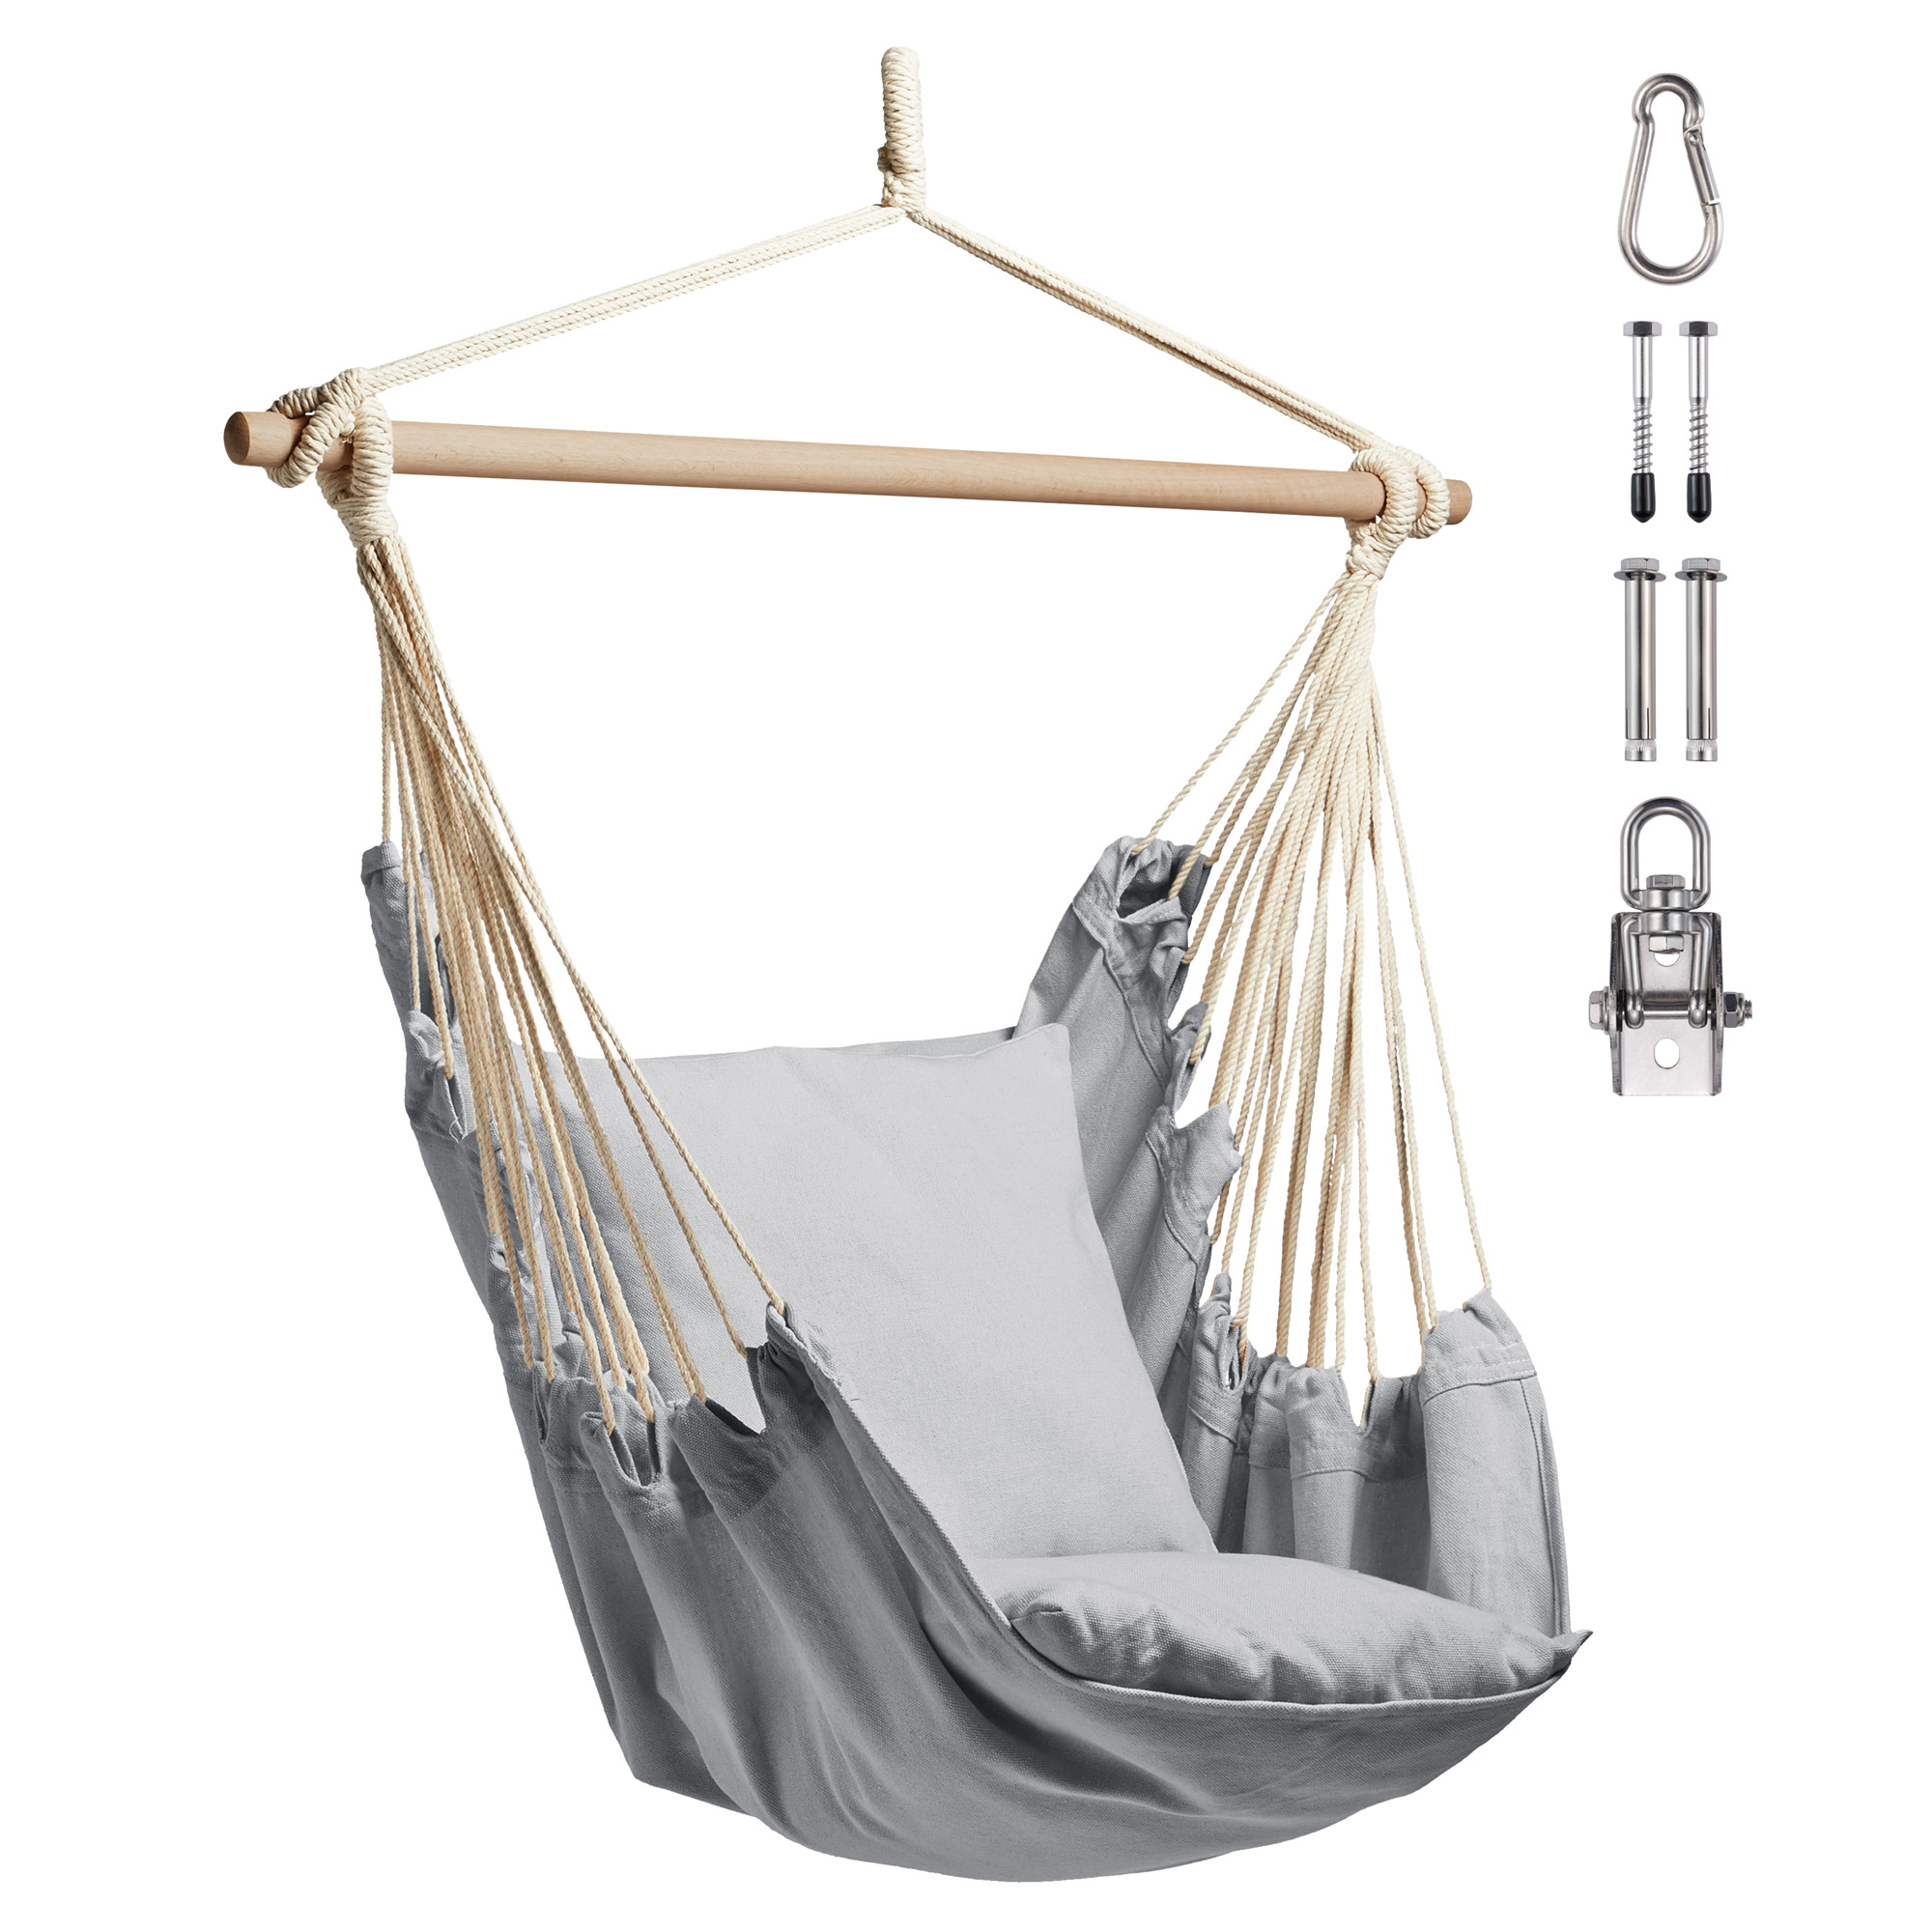 Grey Garden Hanging Chair with Attachments